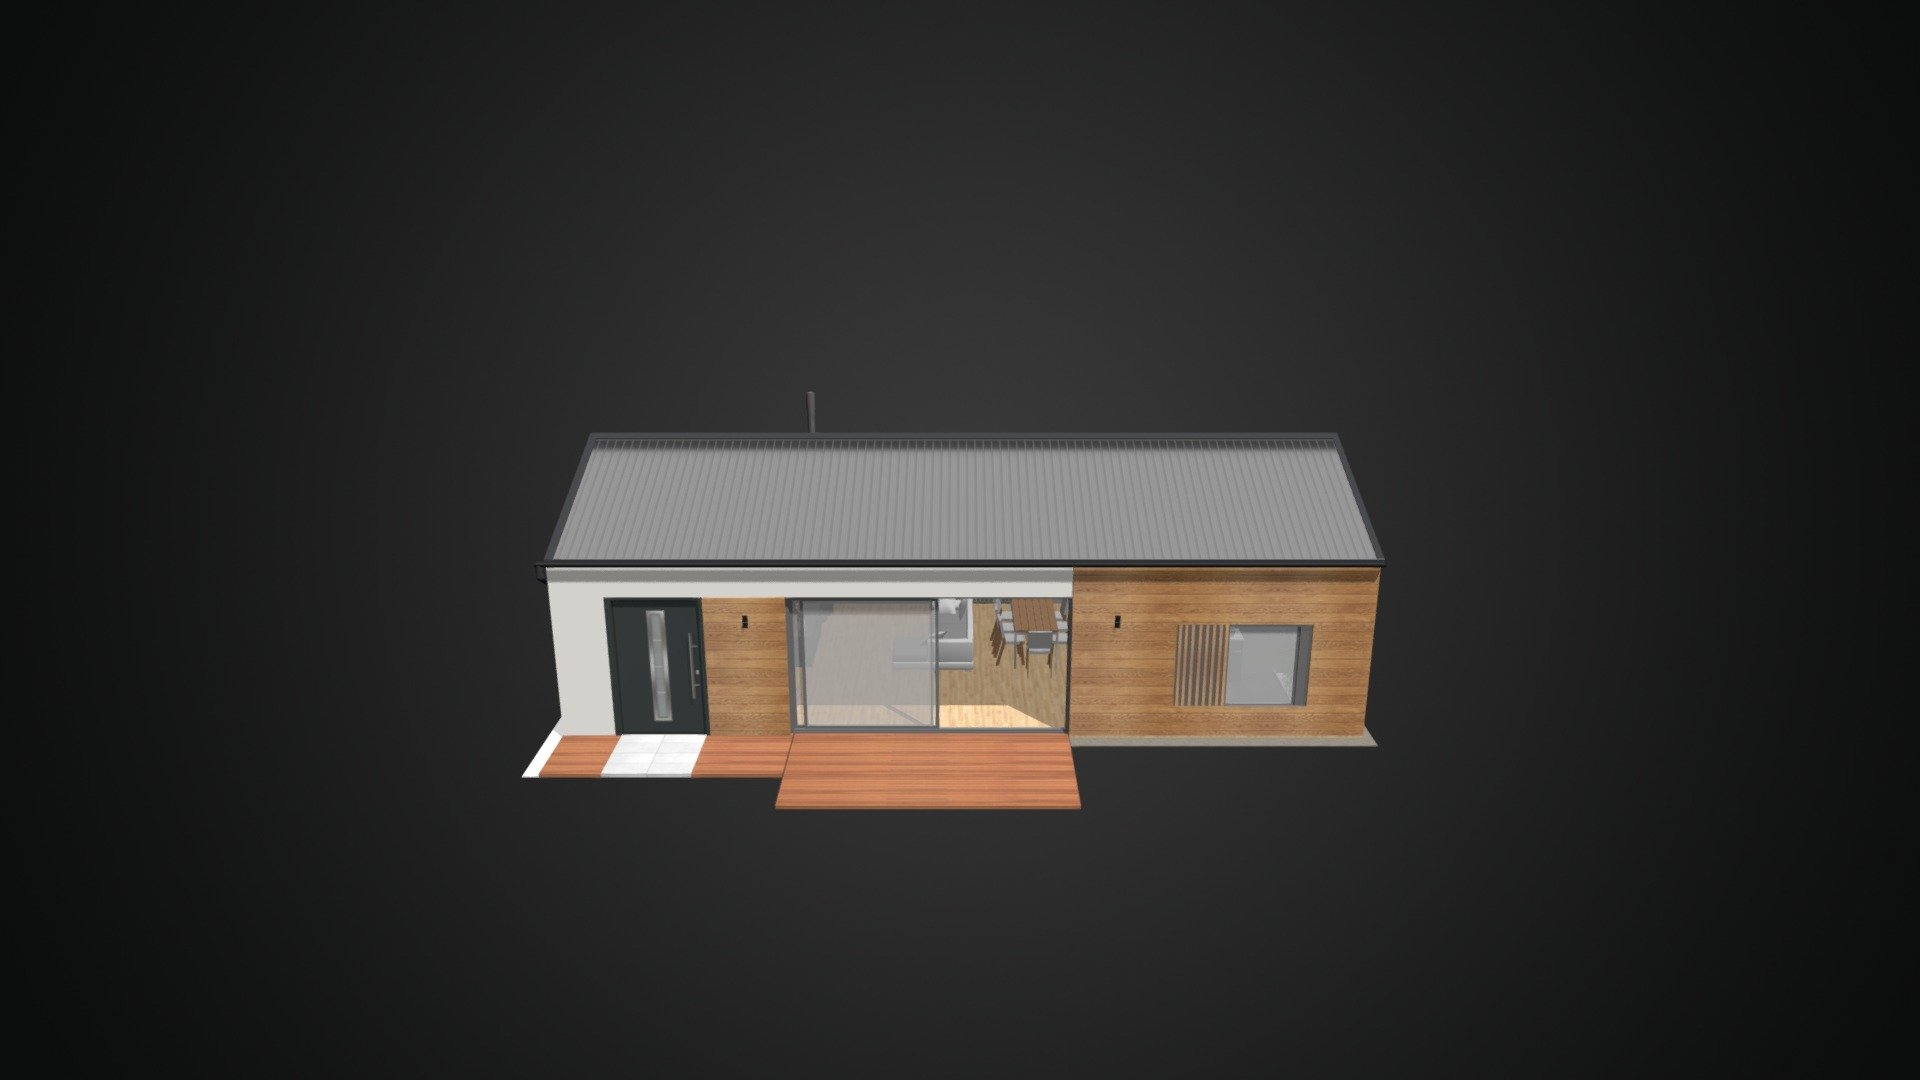 Simple Home